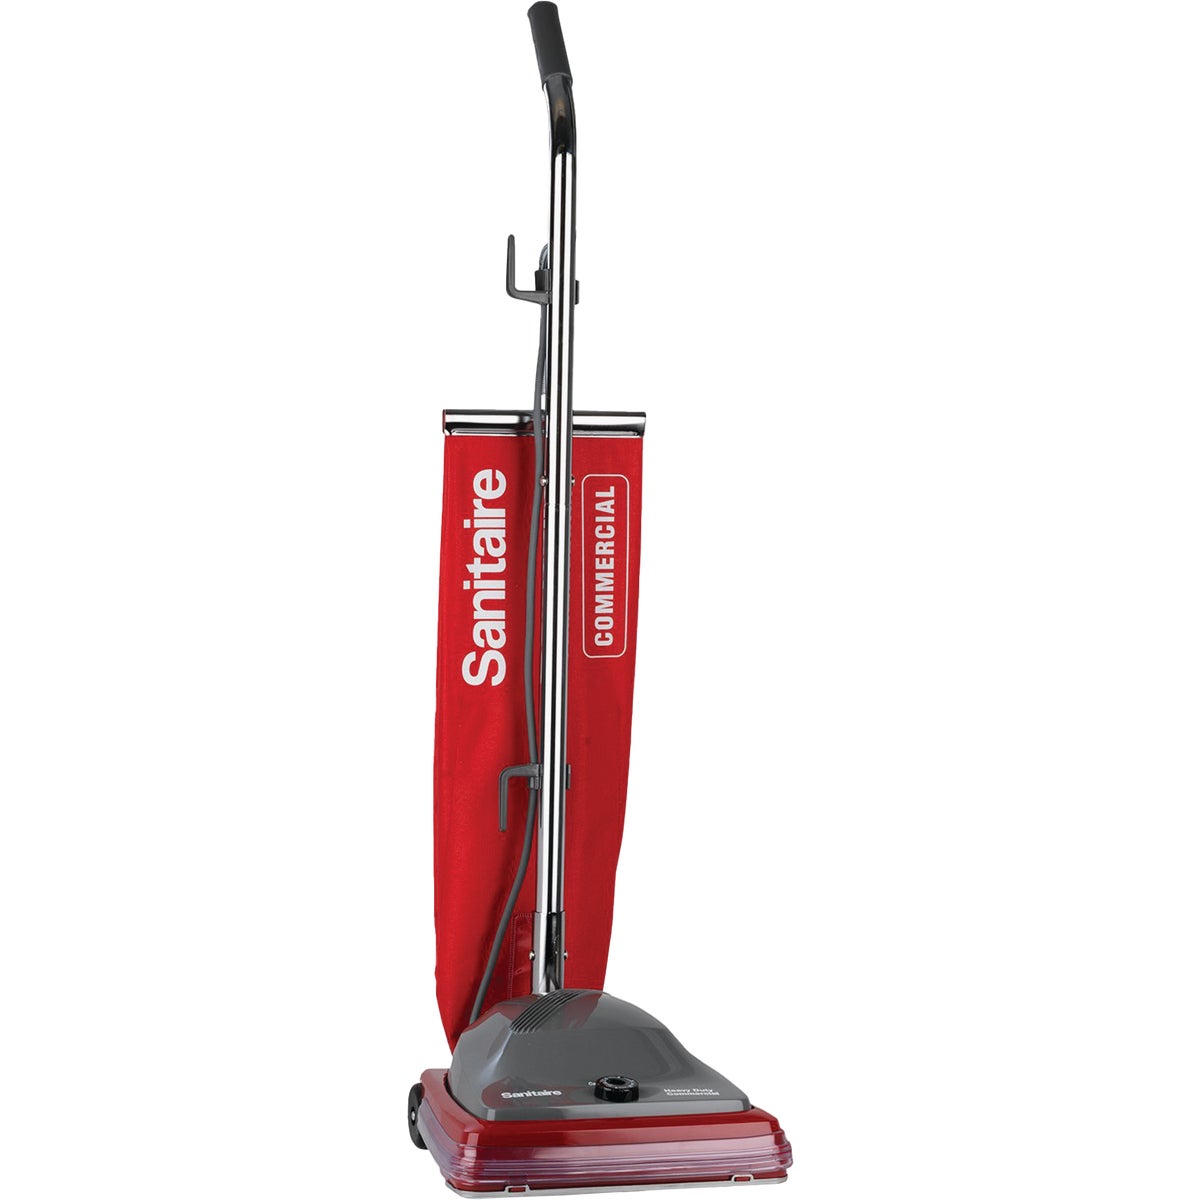 Sanitaire Tradition 12 In. Commercial Bagged Upright Vacuum Cleaner